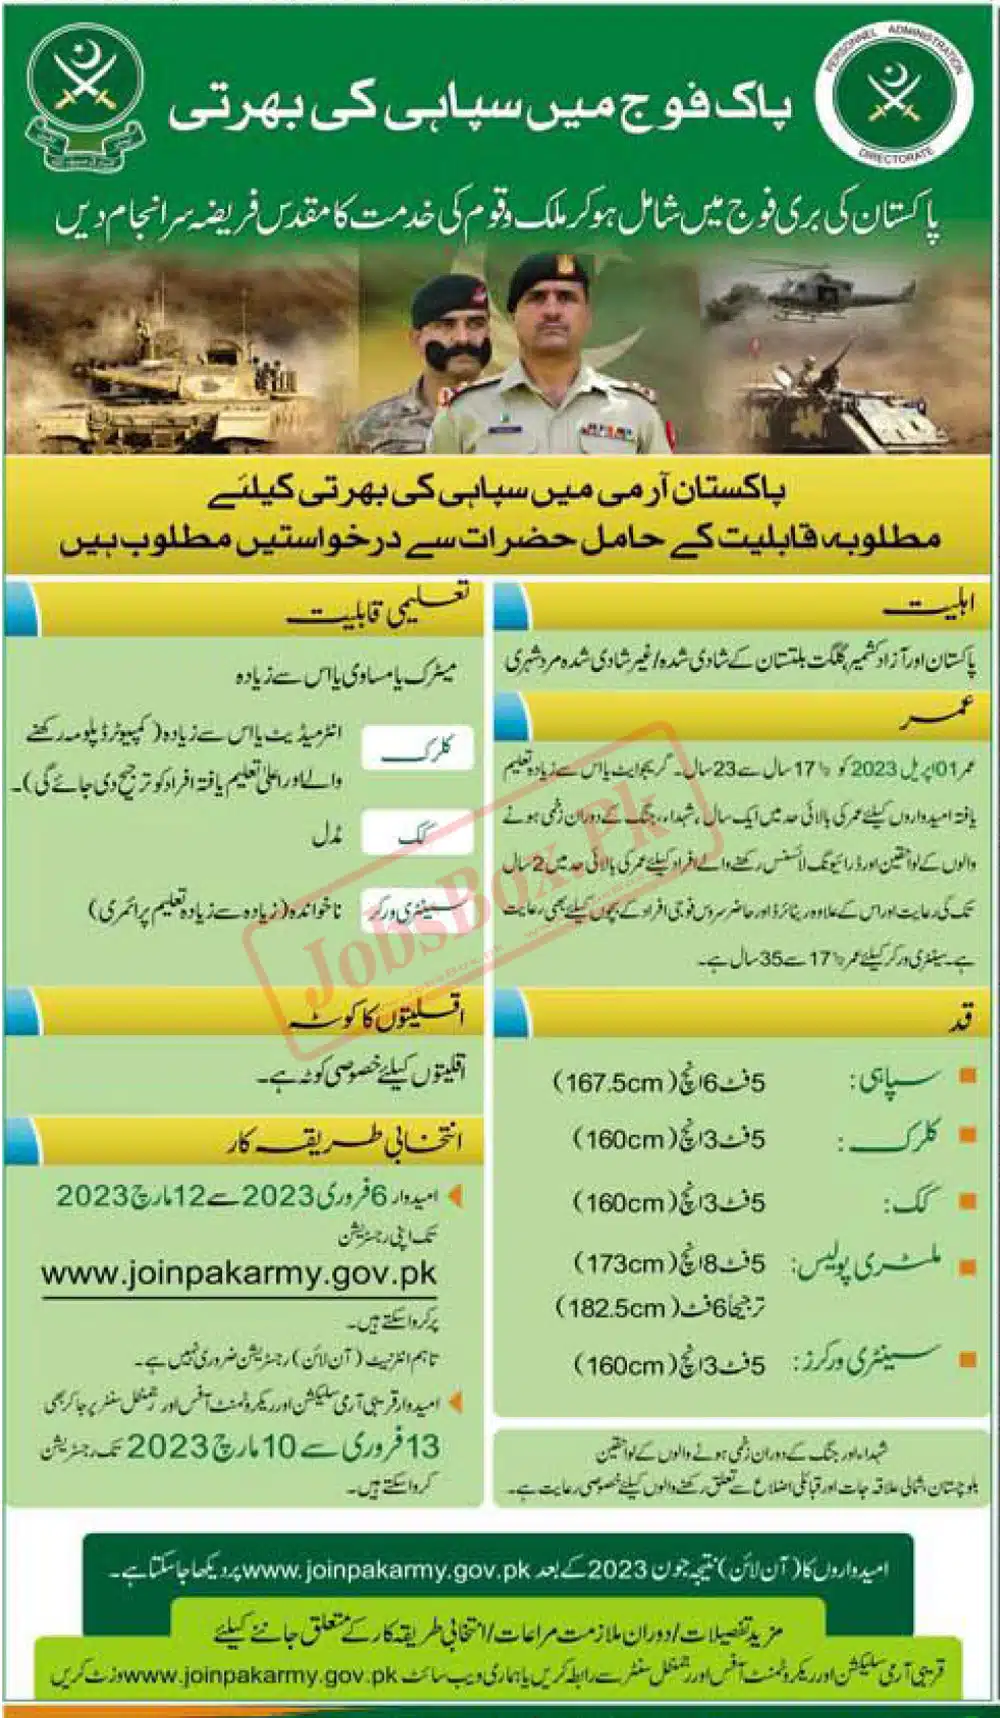 Join Pak Army Online Registration February 2023 (Sipahi, Military Police, Clerk, Cook, Sweeper)